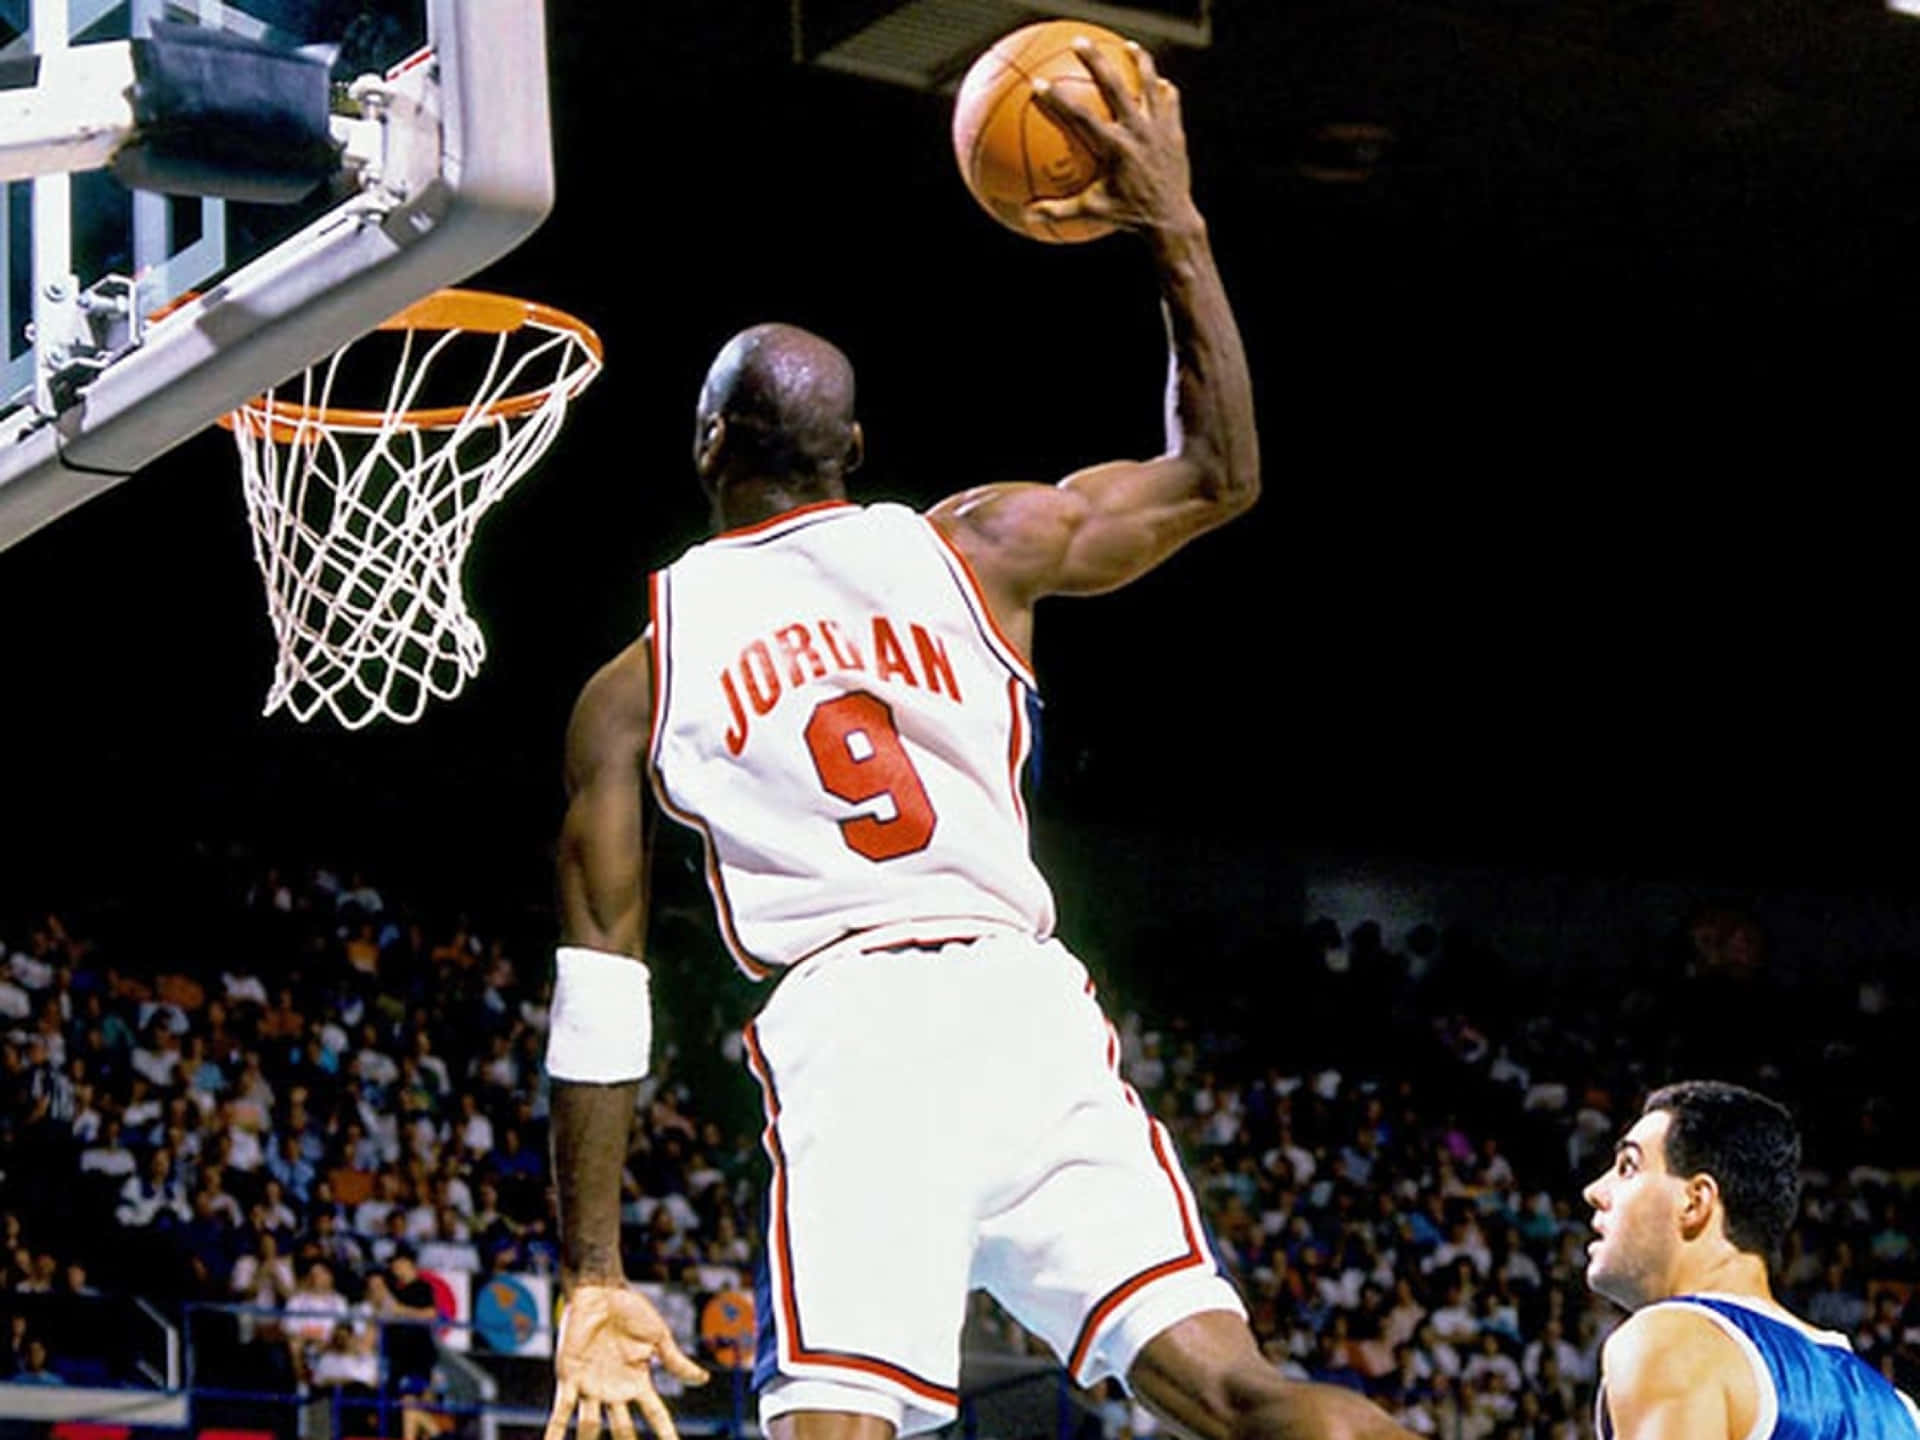 Get inspired to be the GOAT like Michael Jordan with this iconic Jersey Wallpaper